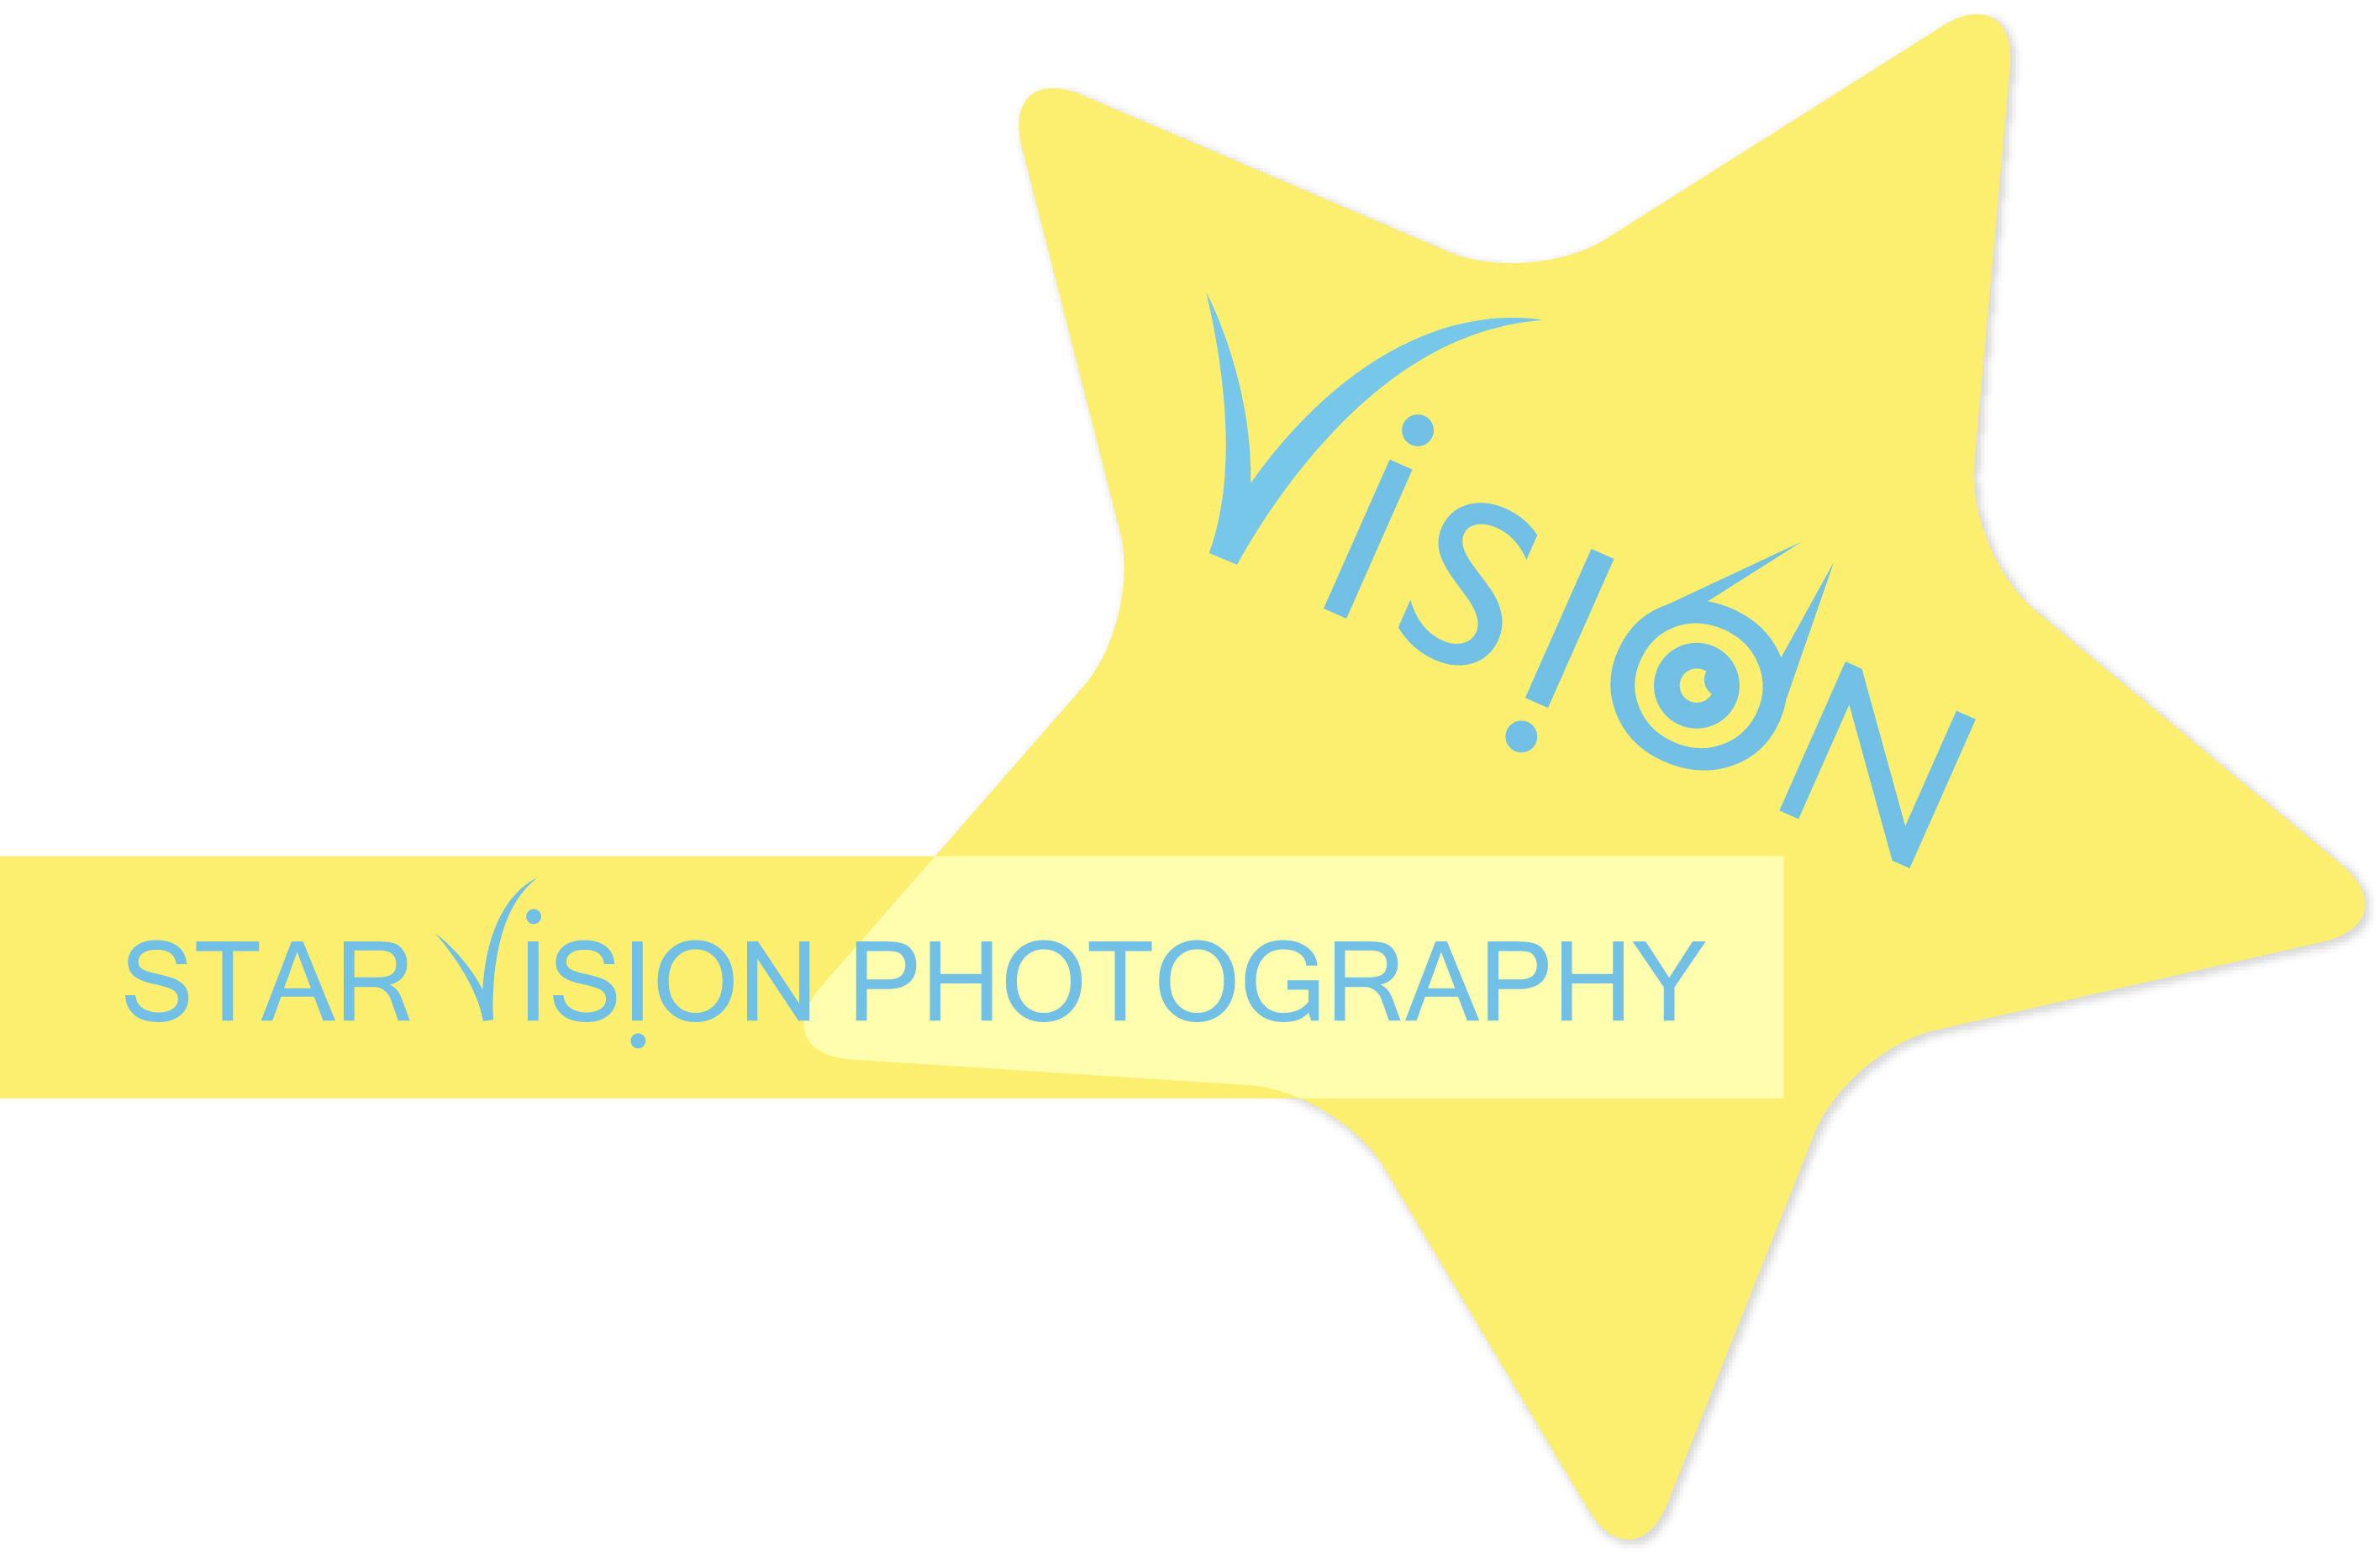 Star Vision Photography